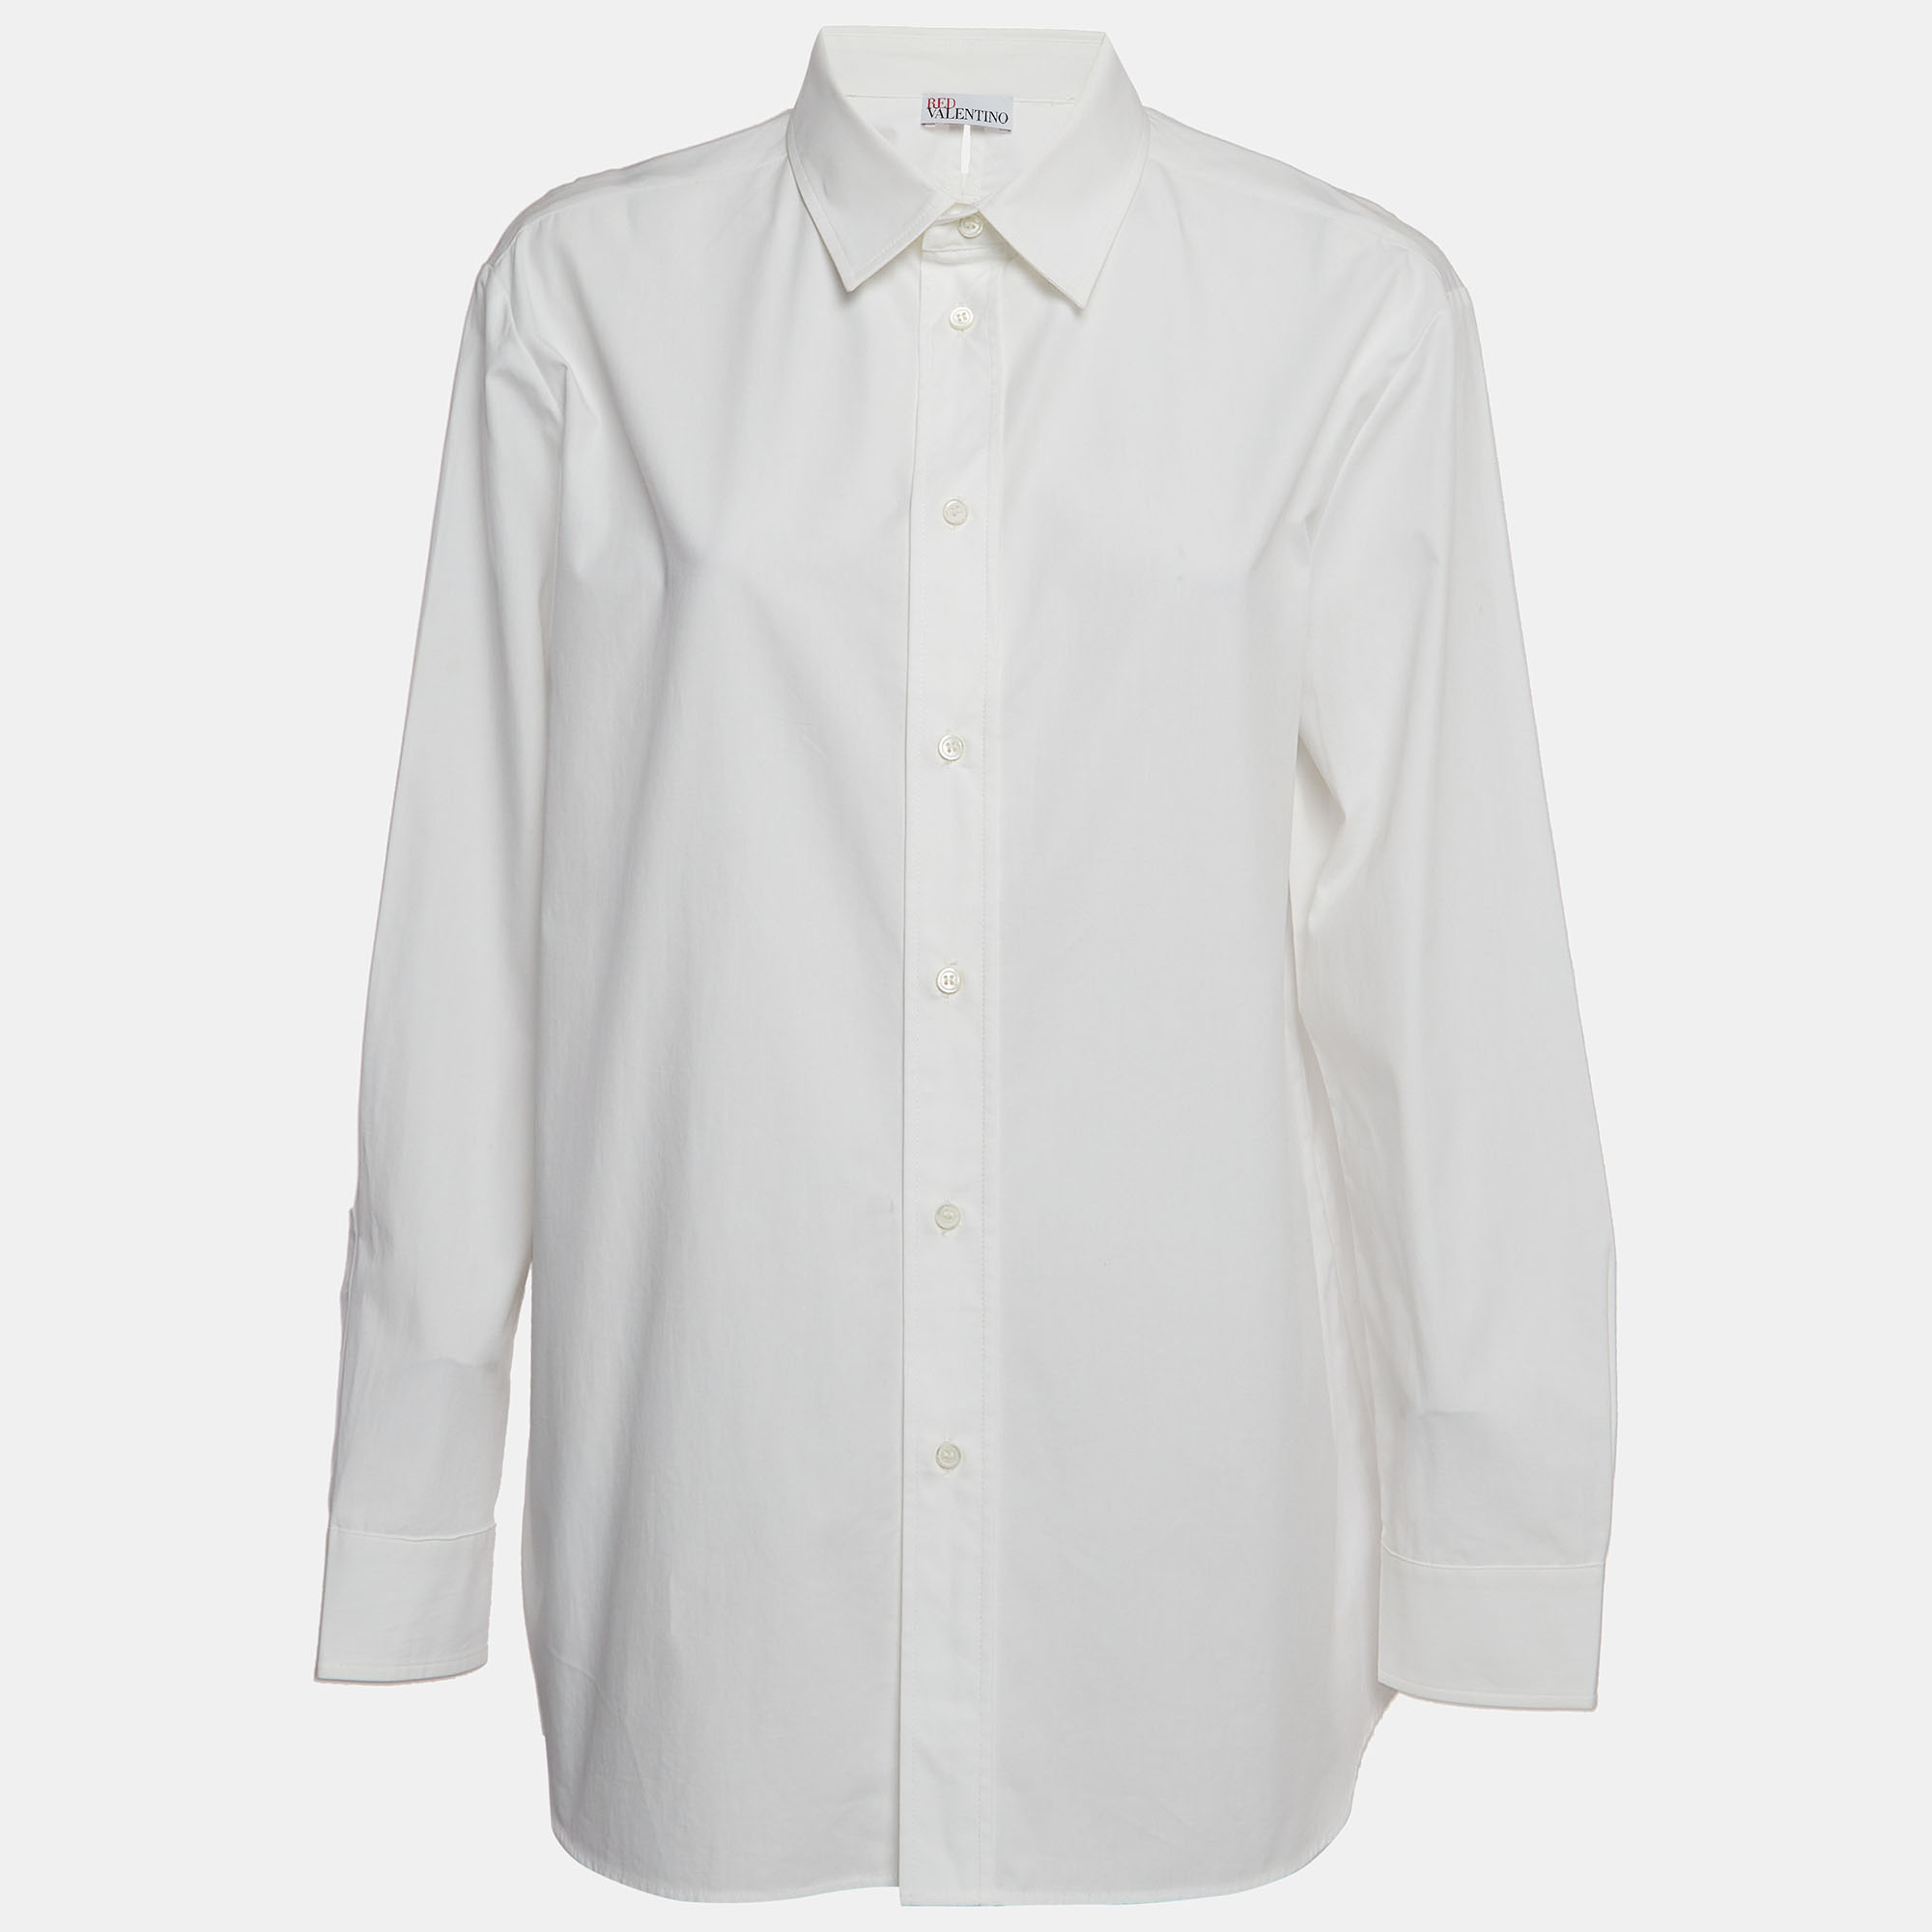 How fabulous does this designer shirt look It is made of fine materials and features a fitted silhouette. Pair it with pants and loafers for a cool ensemble.